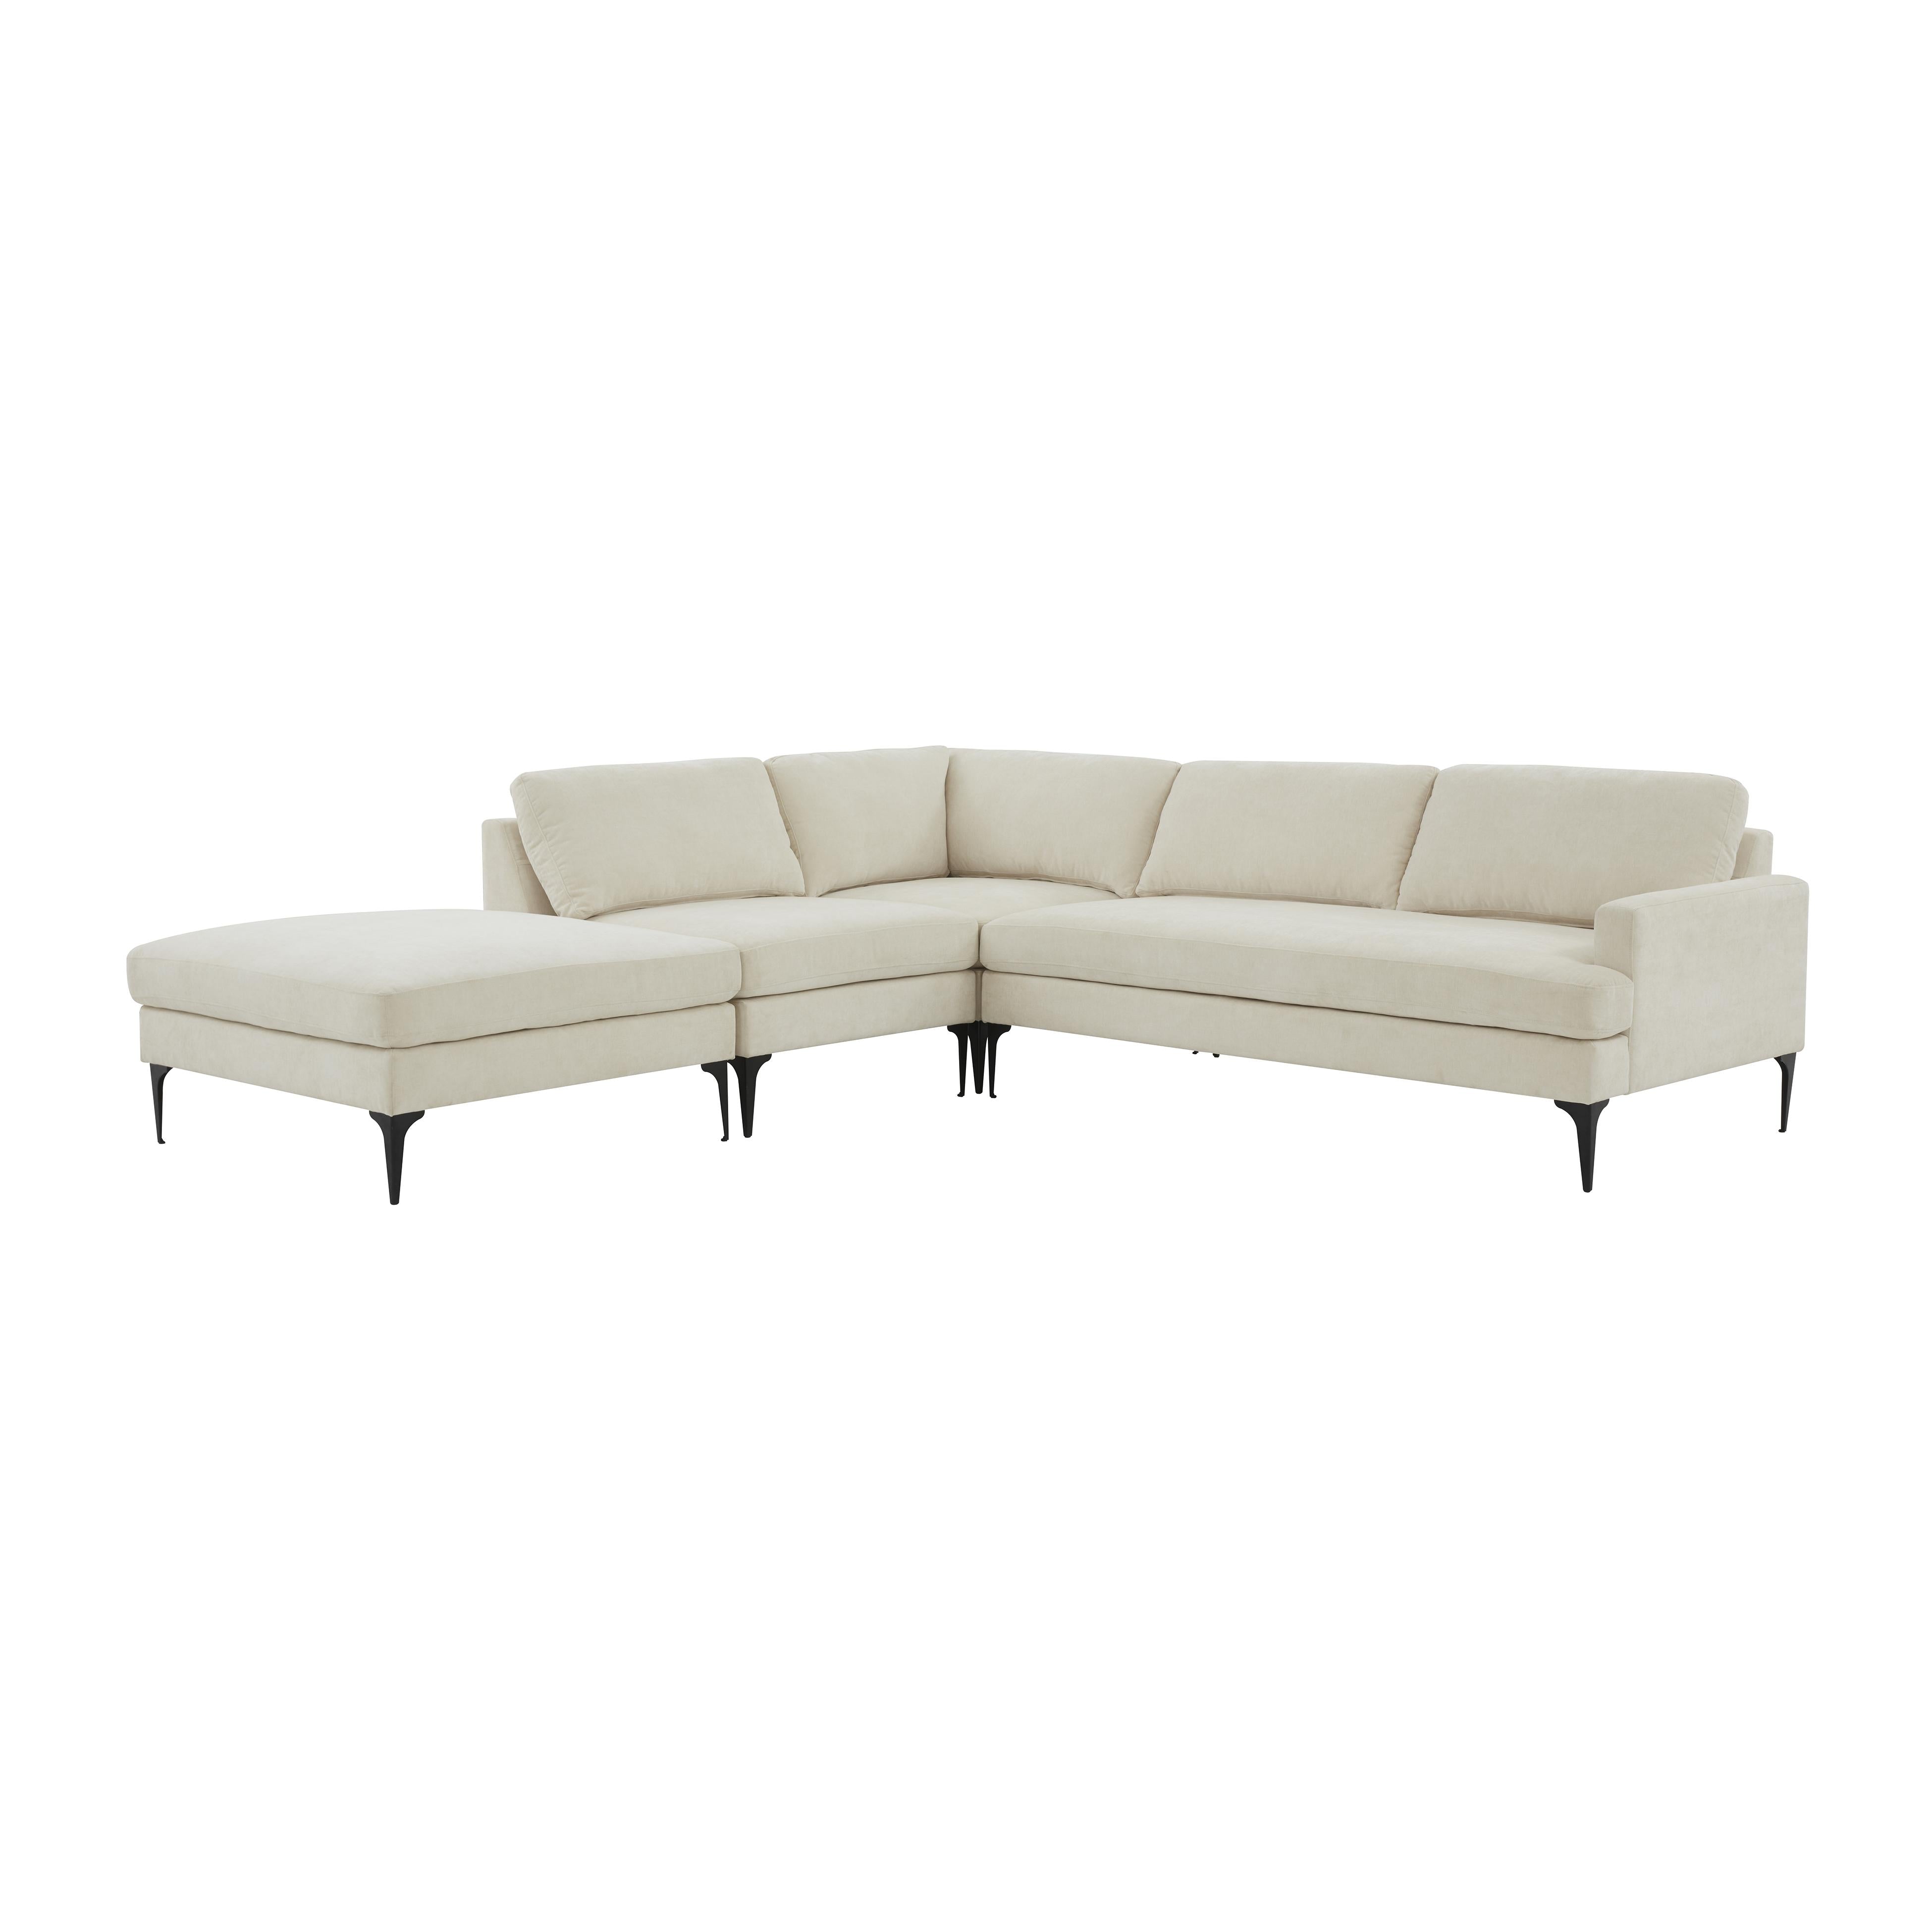 Tov Furniture Sectionals - Serena Cream Velvet Large LAF Chaise Sectional with Black Legs